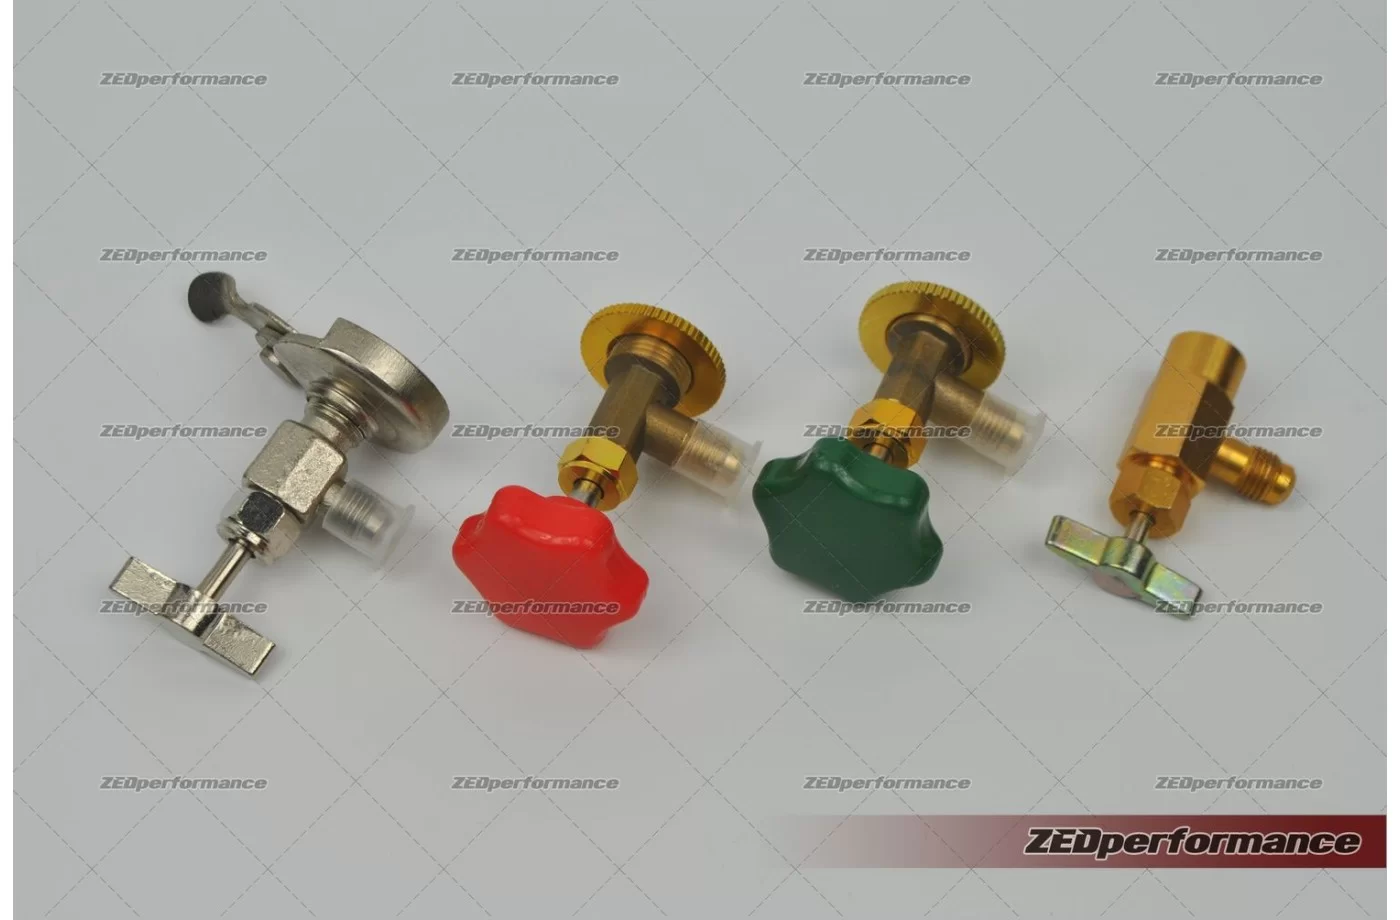 CLAMPED STYLE PIERCING VALVE REFRIGERANT FRIDGE FREEZER R600a GAS CANISTERS 